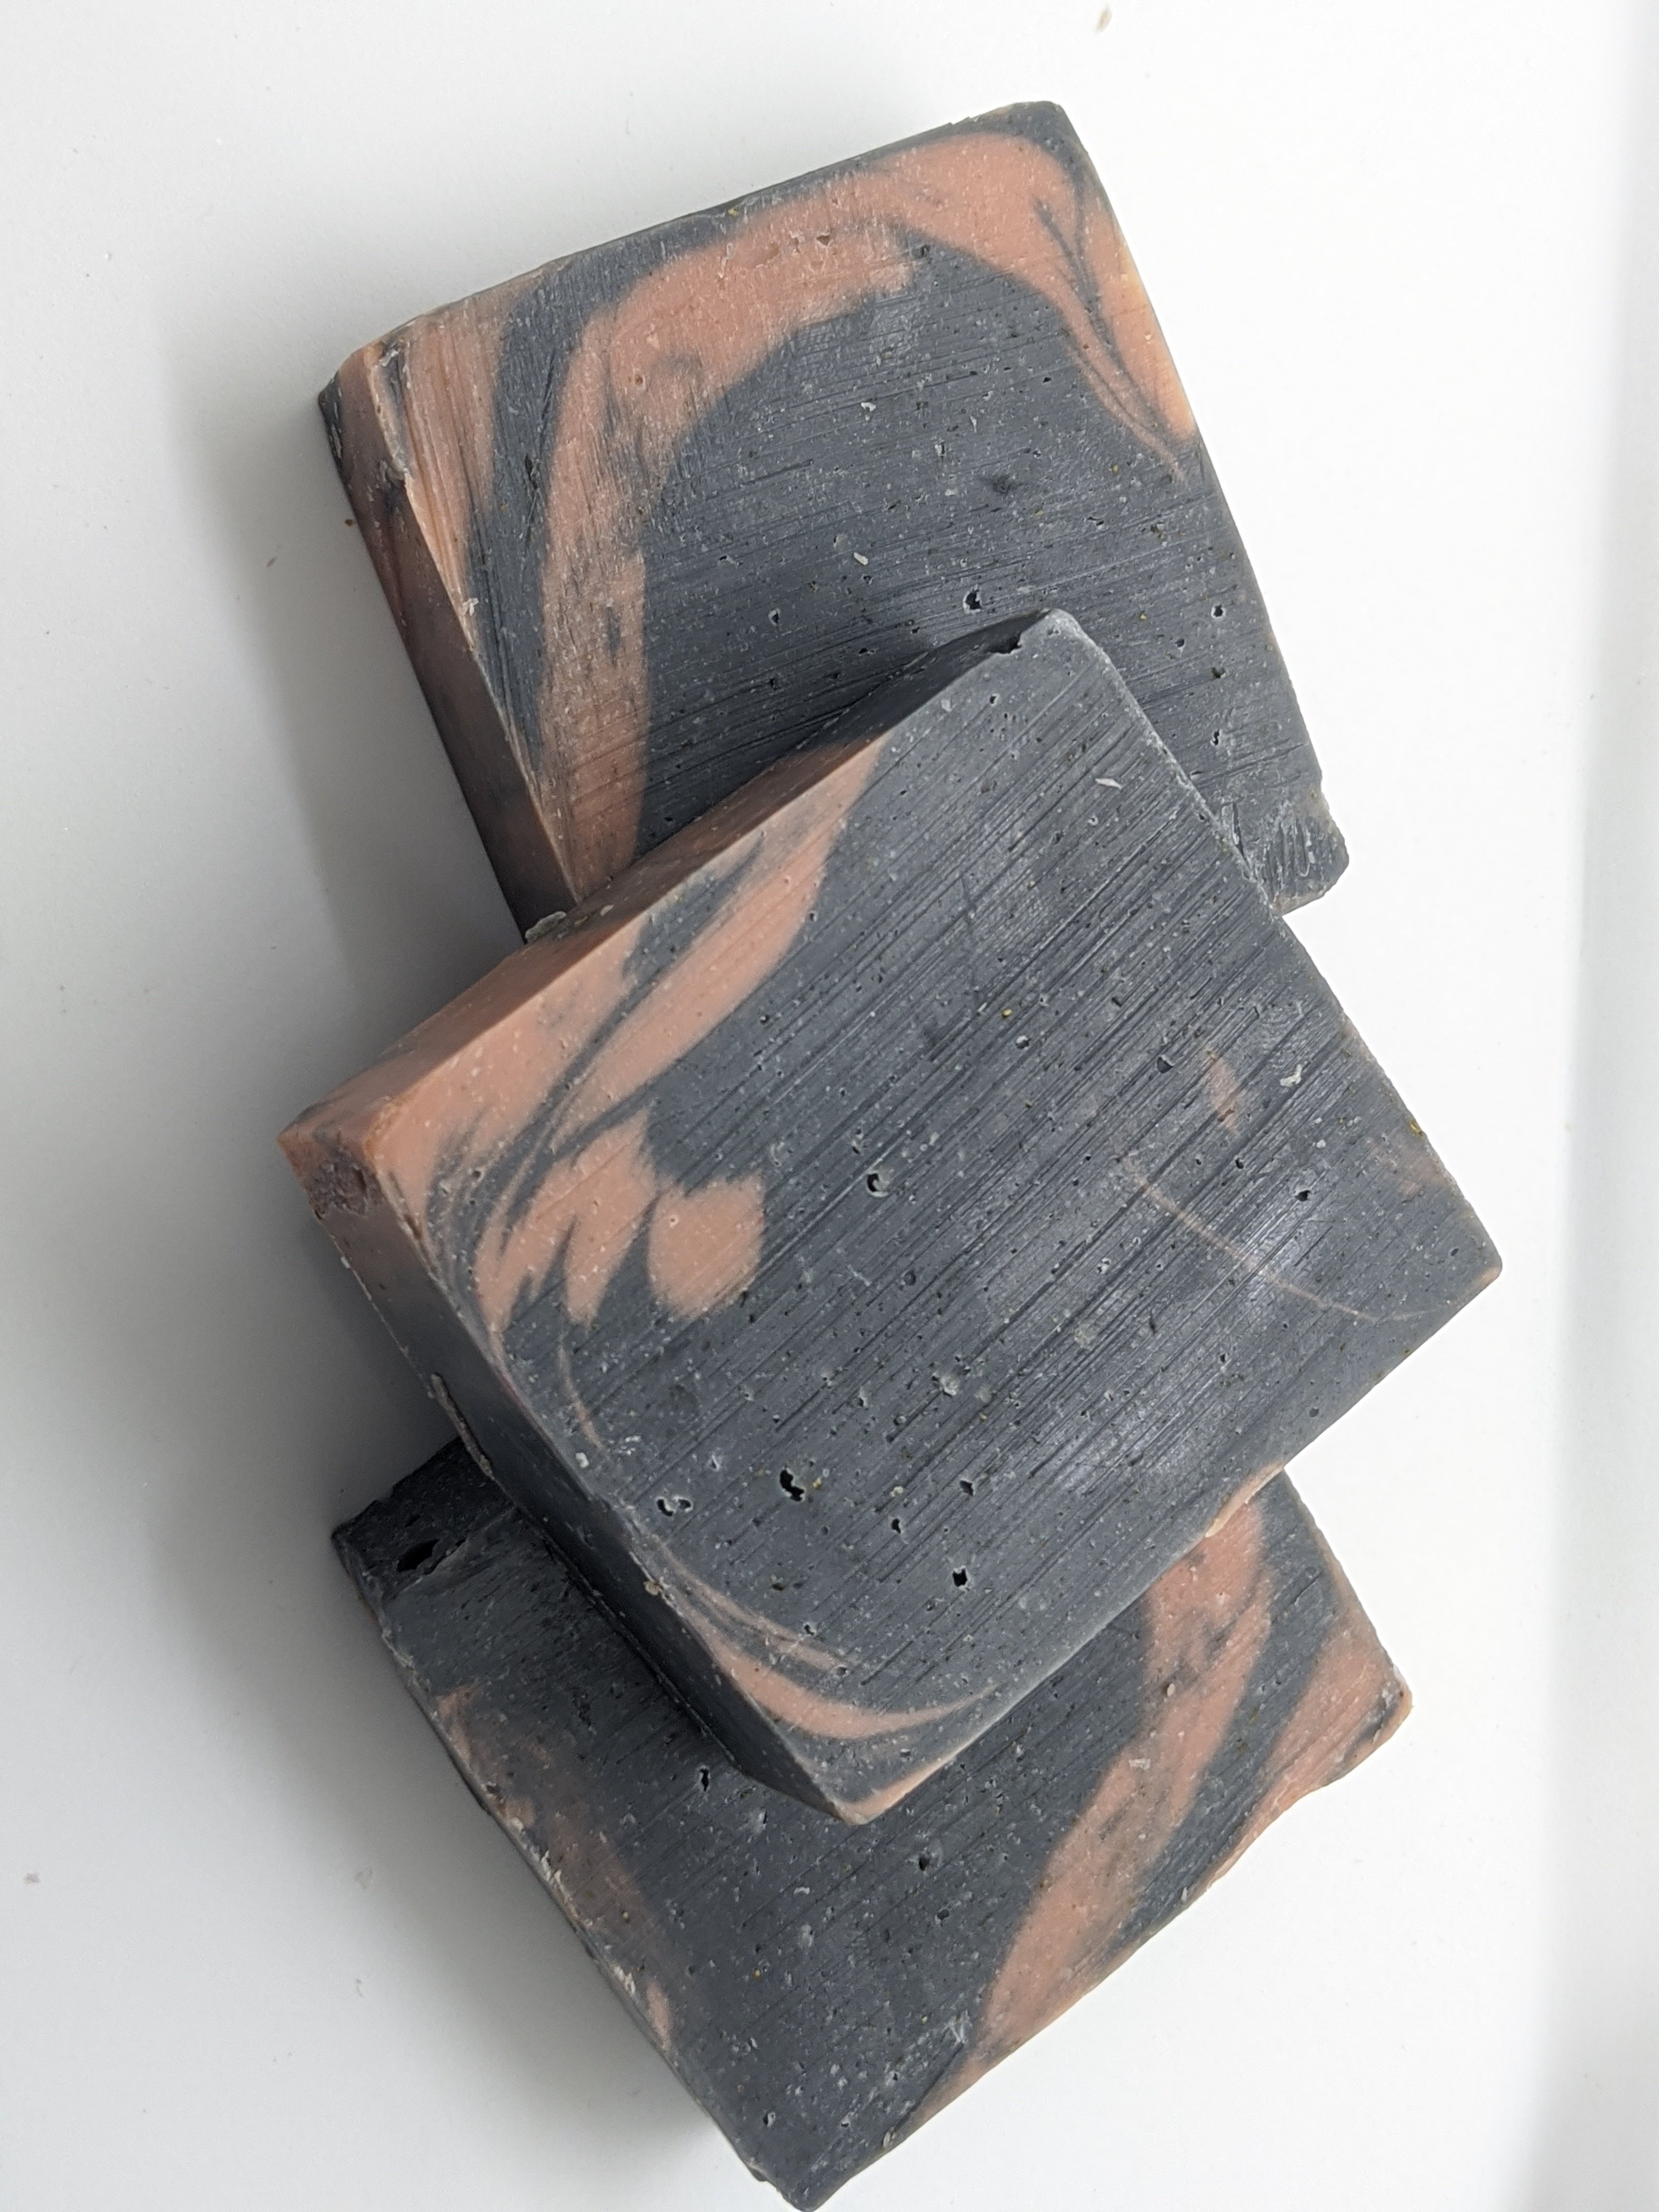 Made with activated charcoal and  organic calendula which has anti inflammatory properties and works wonders on eczema and organic chamomile which is known to help you relax as well as ease irritated skin. We've also added some Rose clay to gently coax excess oil out of your skin to help prevent clogged pores and promote skin health. It's gently cleanser and draws out impurities while moisturizing  If you have an allergic reaction please contact us and discontinue usage of product.